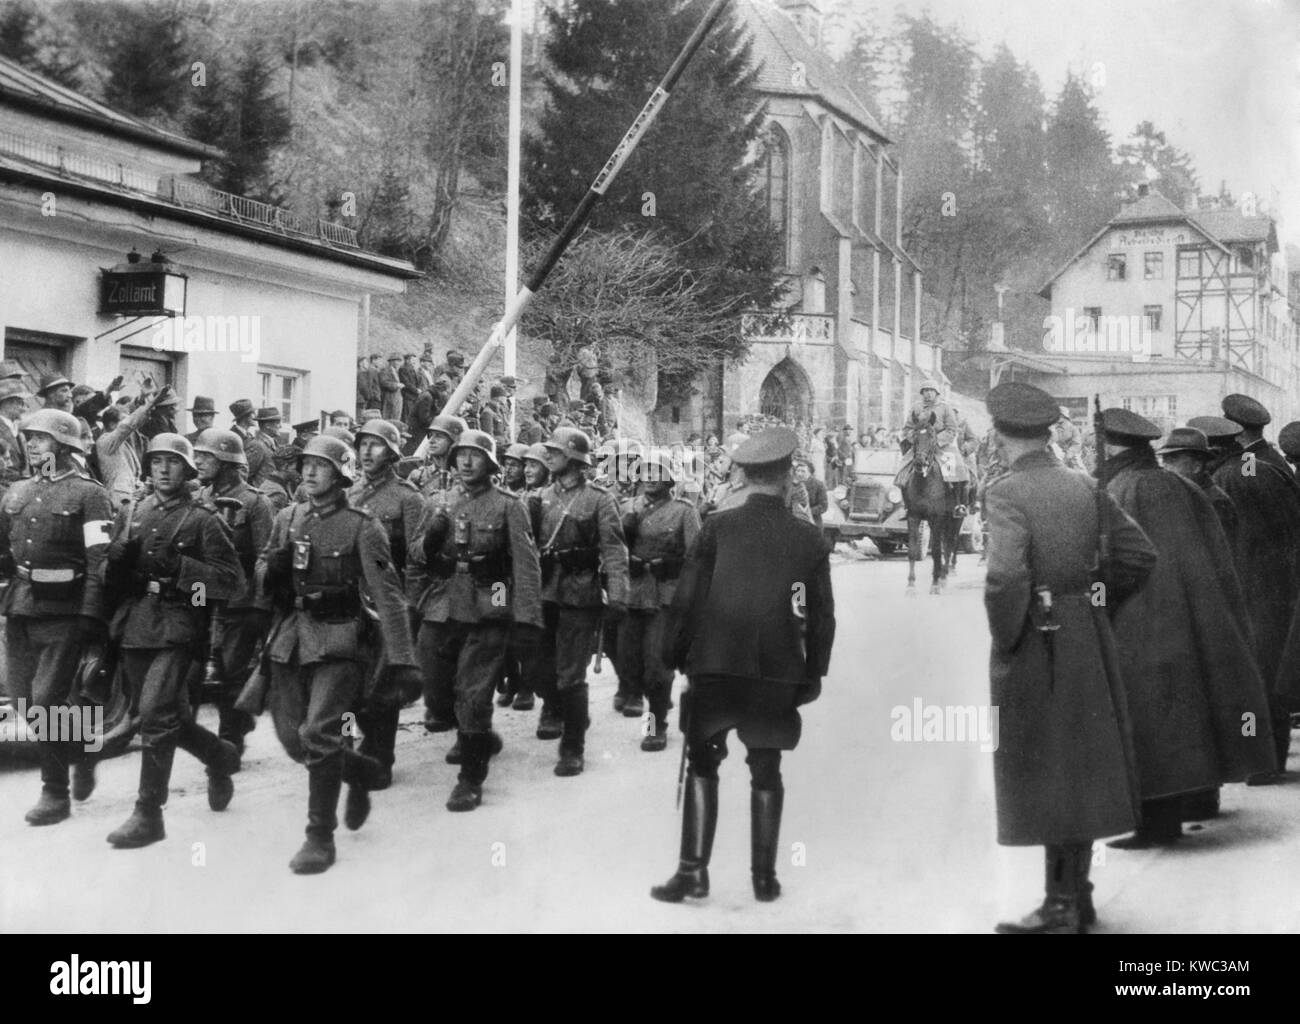 German soldiers cross border in town of Kufstein-Kieferfelded on the Austria-German frontier. March 1938. The Austrian government had ordered the Austrian Armed Force not to resist. (BSLOC 2015 13 28) Stock Photo